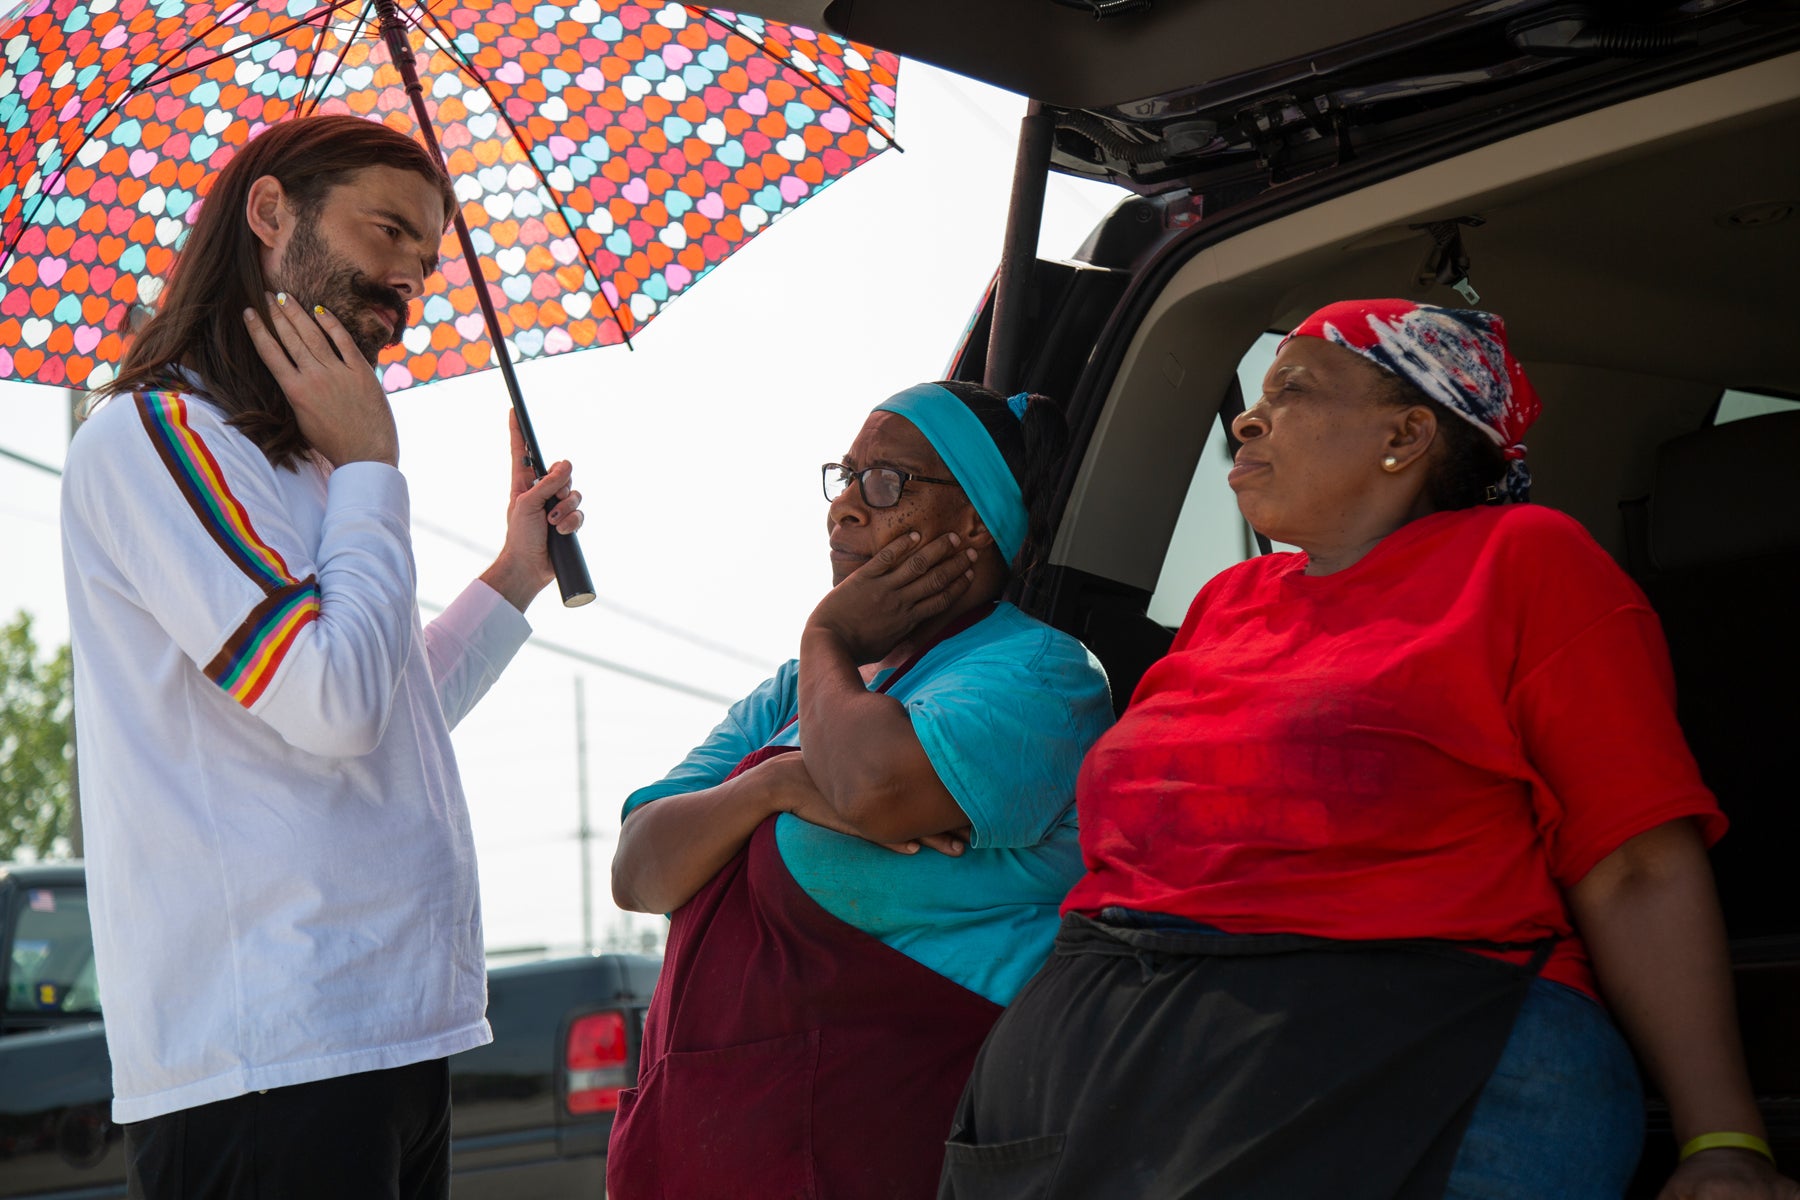 Jonathan holds an umbrella decorated with small hearts and speaks to two women who are sitting on the bumper of a truck in an episode of Queer Eye. 